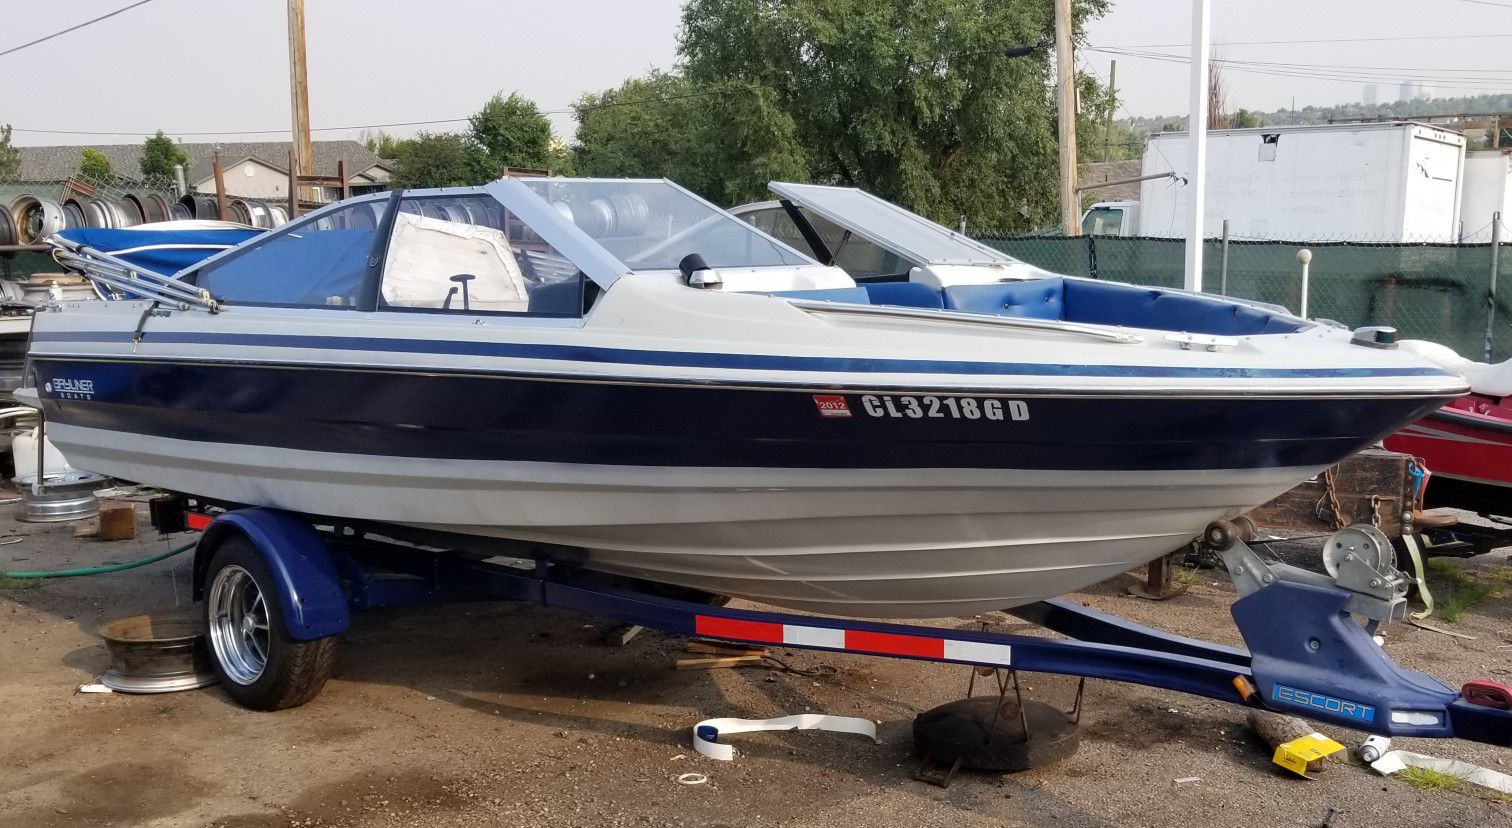 PENDING PICK UP Boat 1989 bayliner capri with mercury 85hp outboard motor